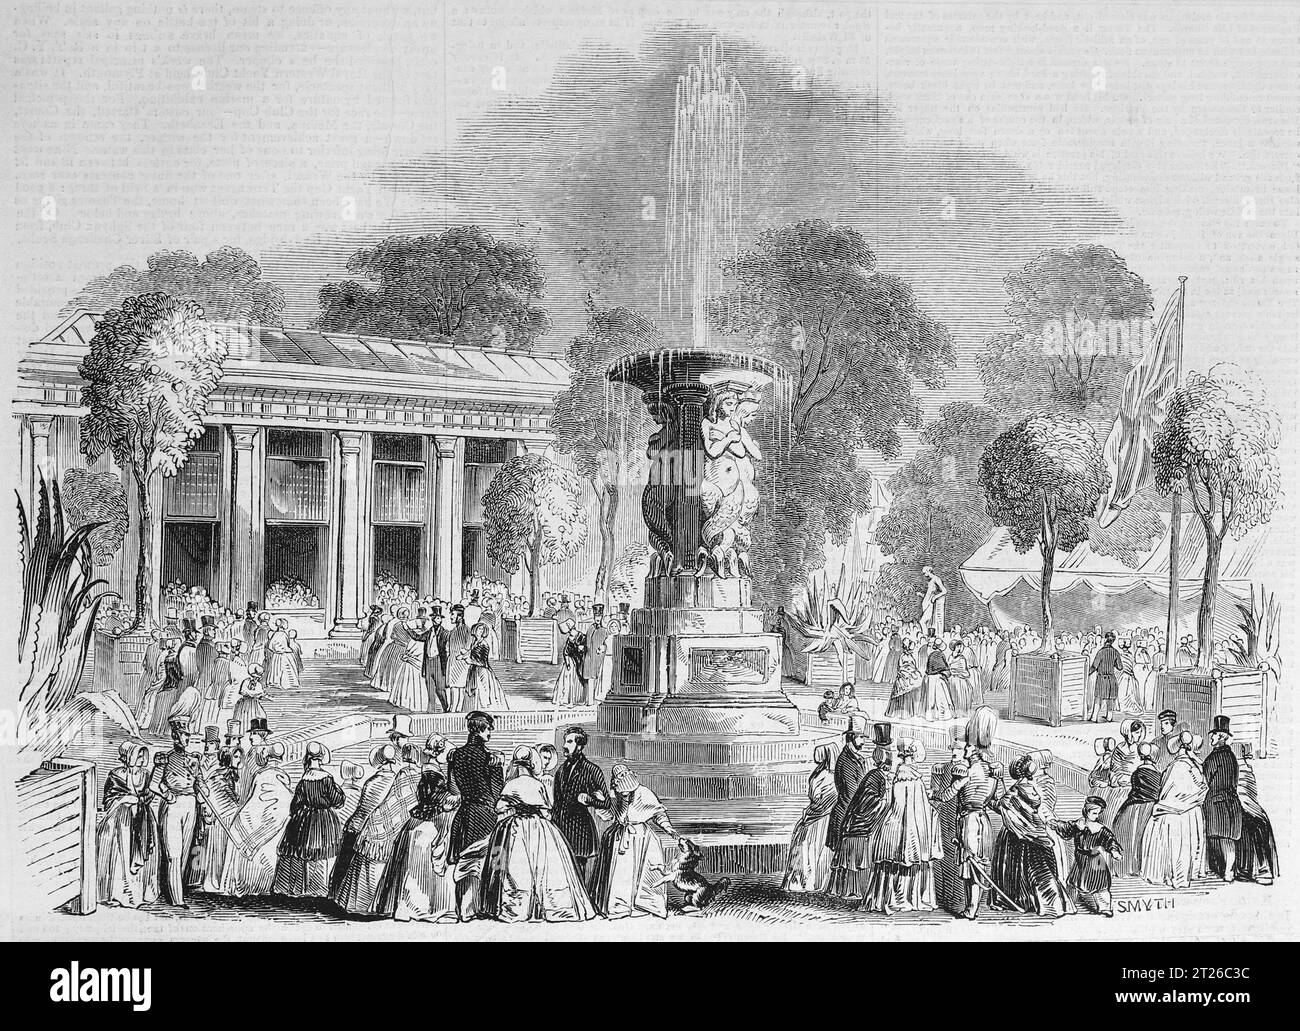 The Grande Fete at Mount Edgecumbe. The Bazaar and Italian Gardens. Black and White Illustration from from the 'Old England' published by James Sangster in 1860. Stock Photo